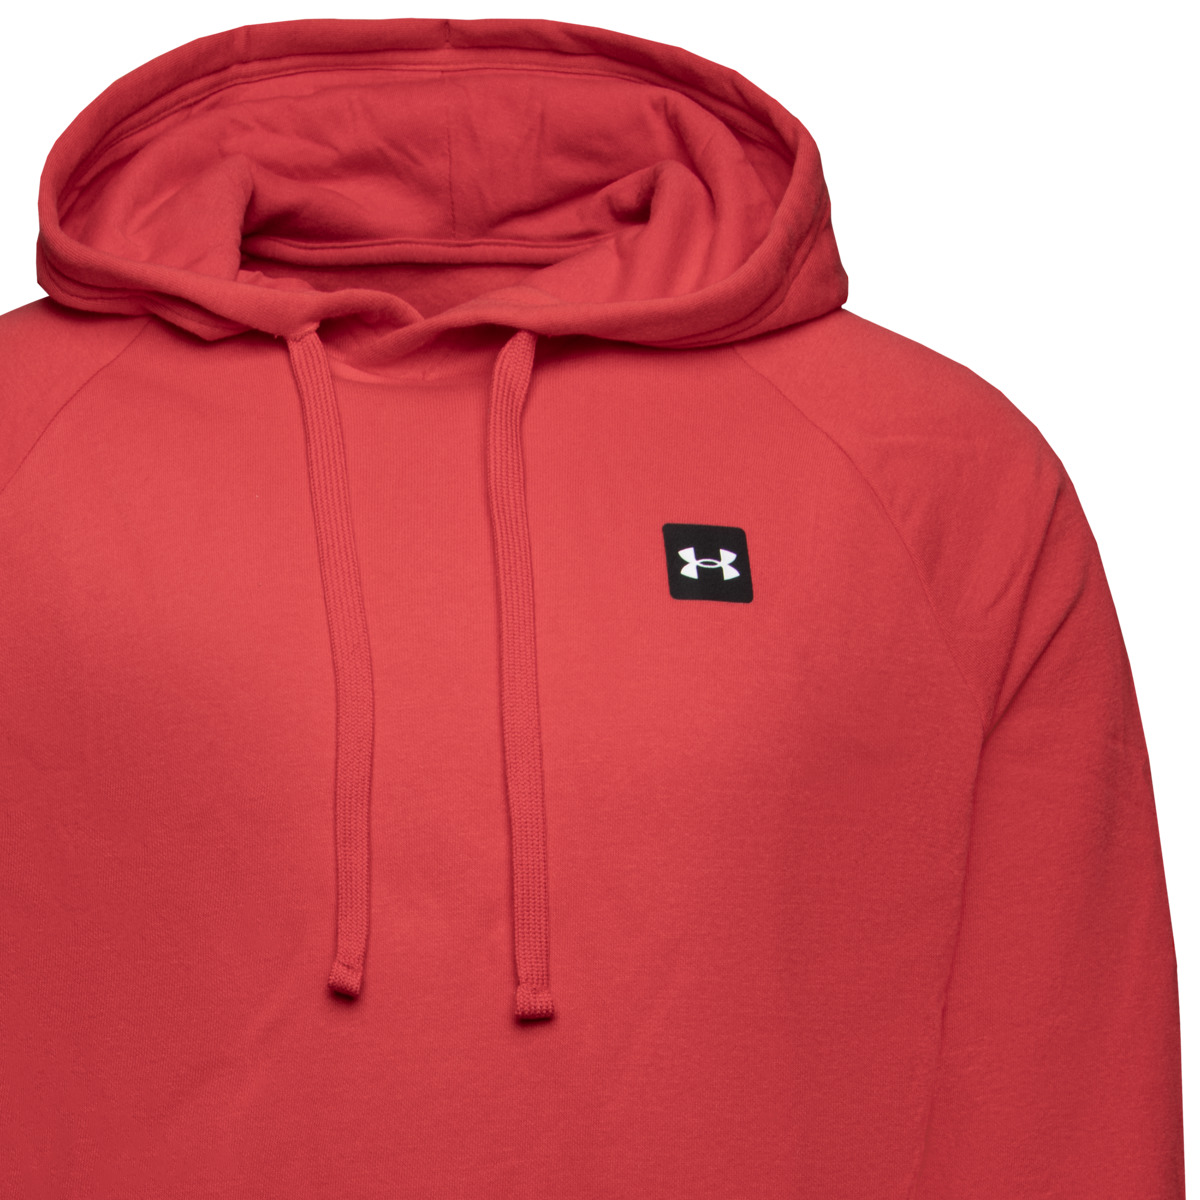 Under Armour Rival Fleece Hoodie rot